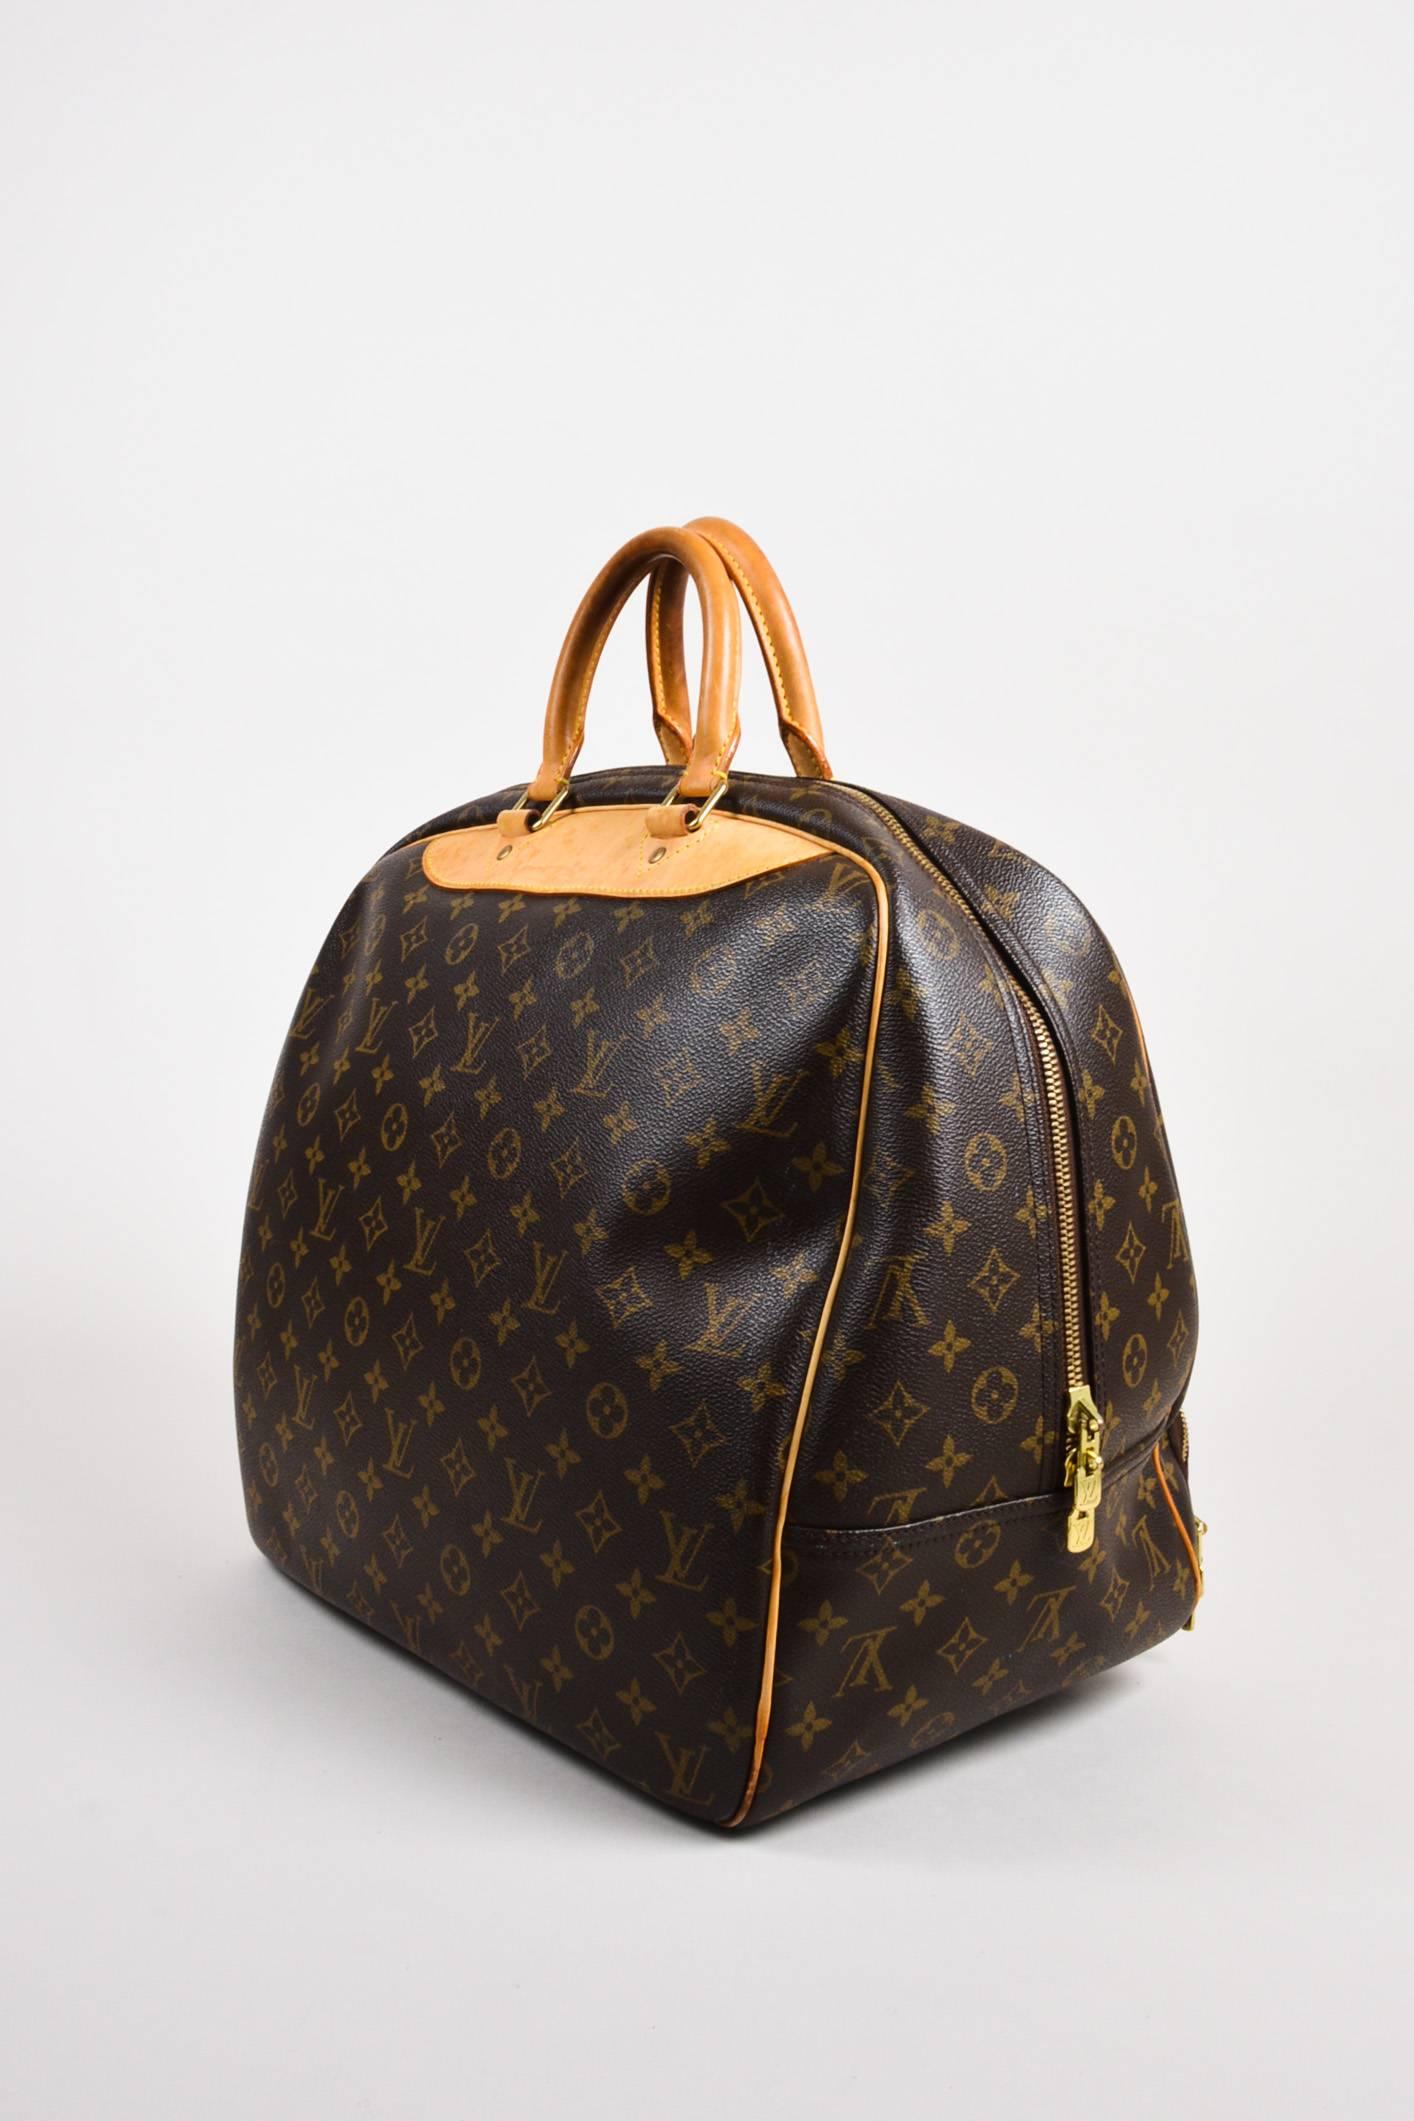 Brown and tan monogram coated canvas 'Evasion Travel MM' bag by Louis Vuitton.  This bag features gold tone hardware throughout, front zip pocket, and removable luggage tag.  Fully lined.  Zip top closure.  Date code: MB3097

Interior features: